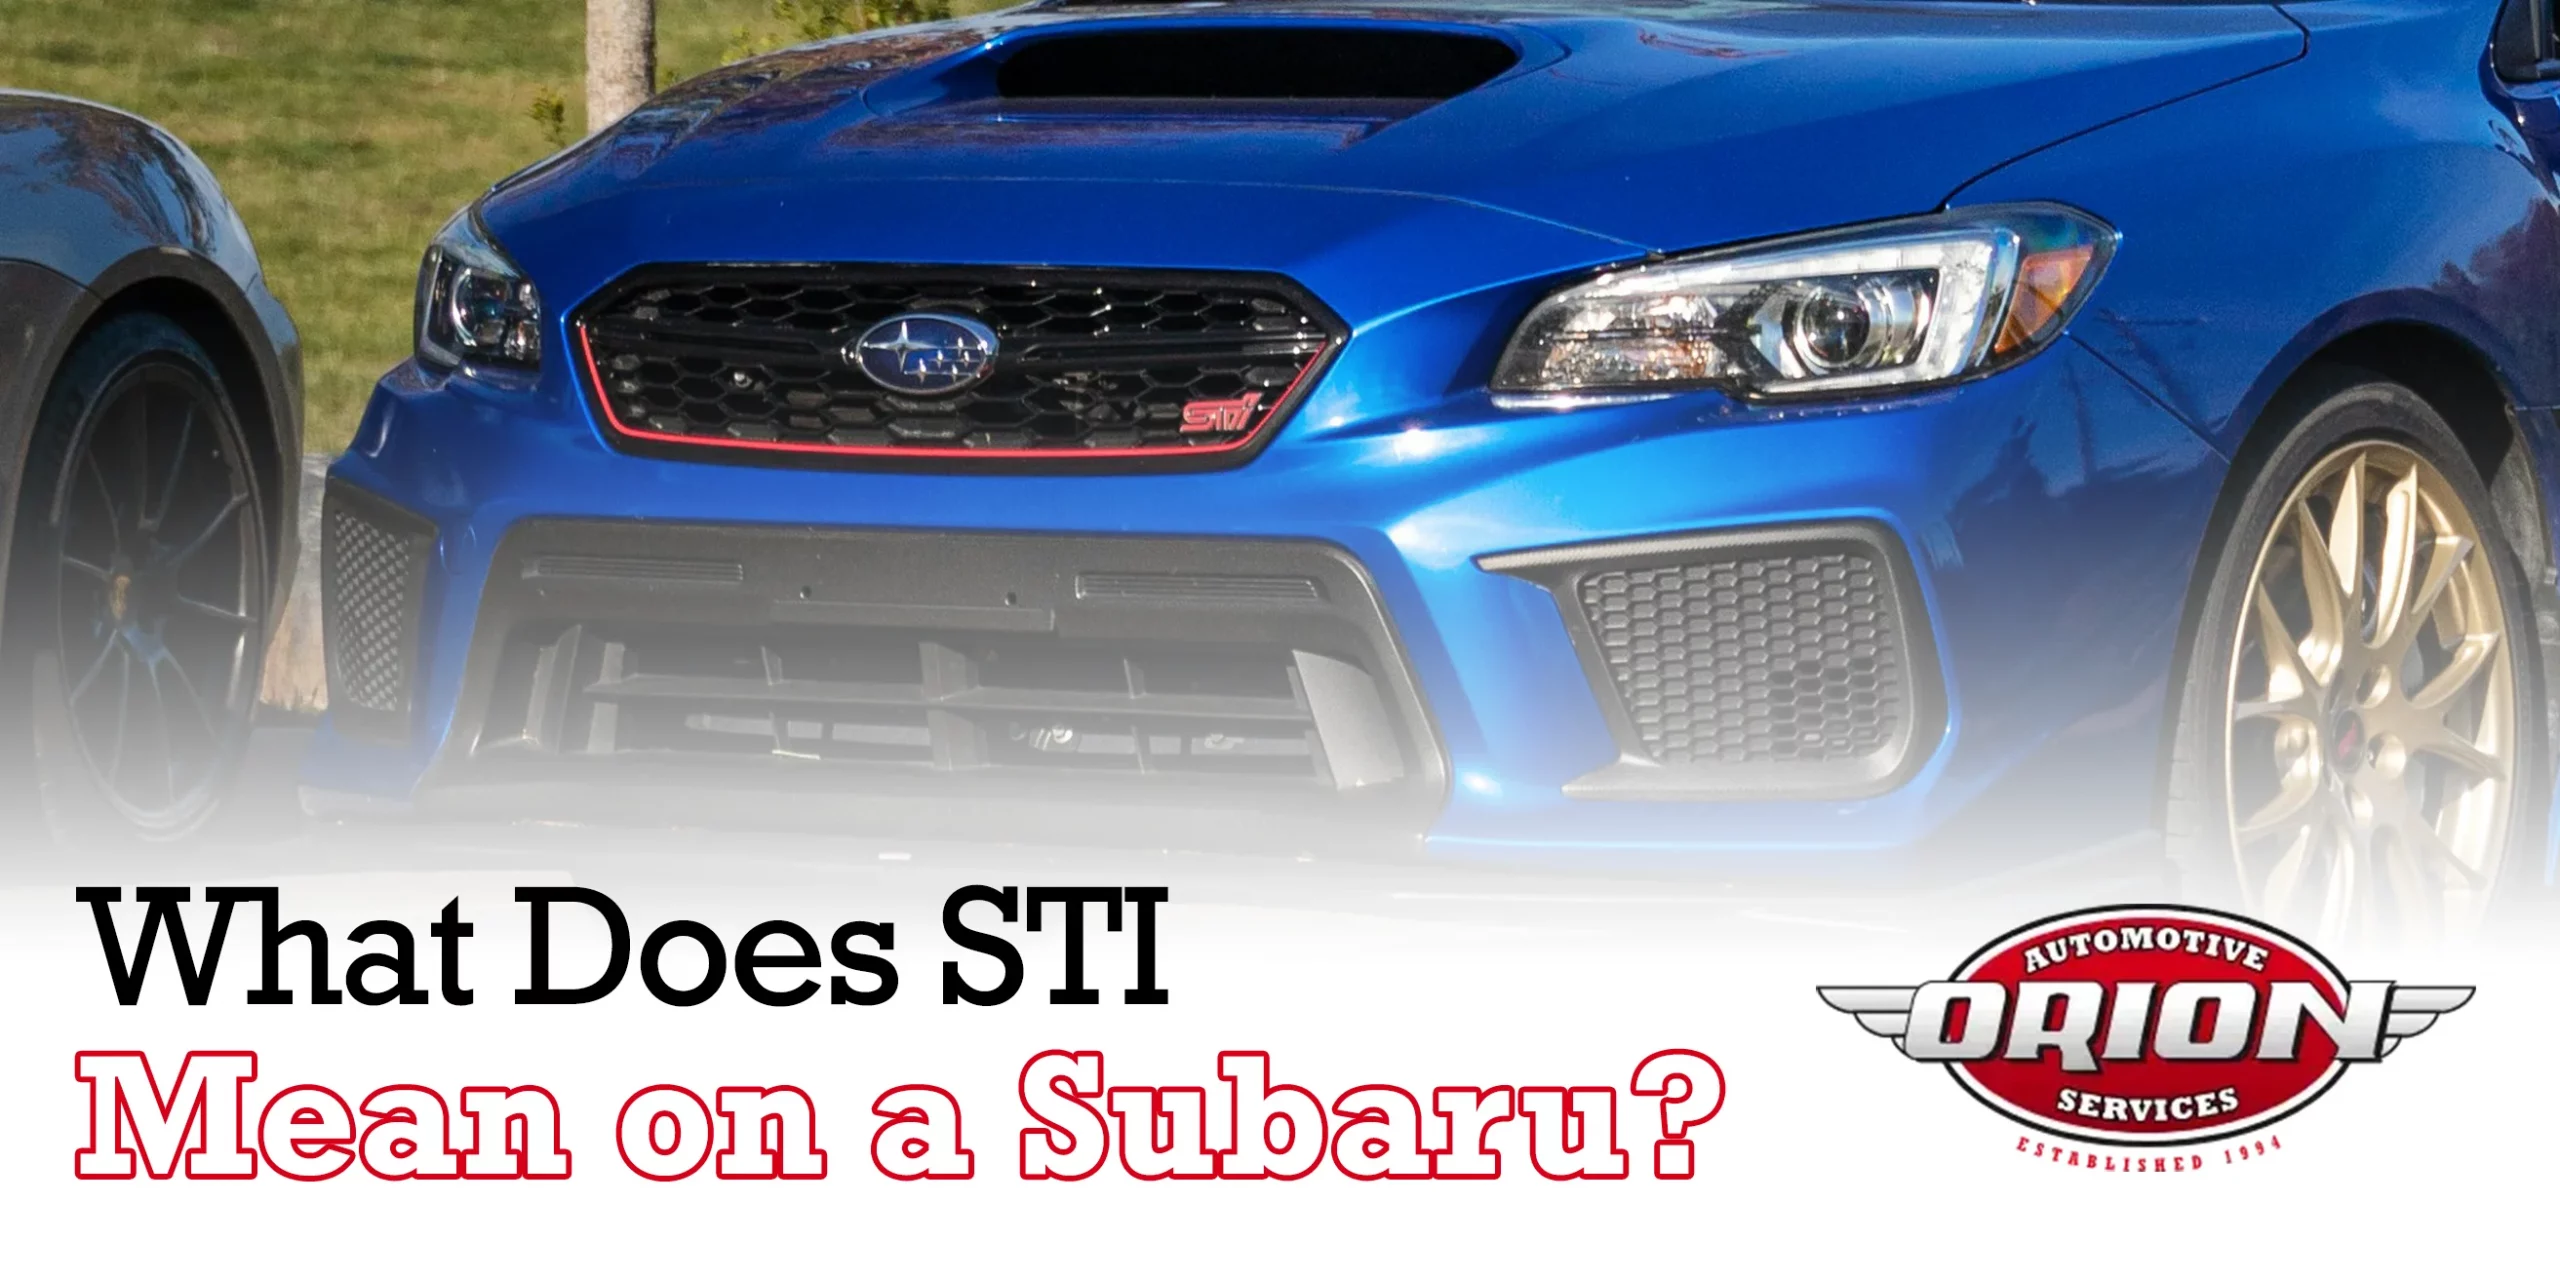 What Does “STi” Mean On a Subaru?